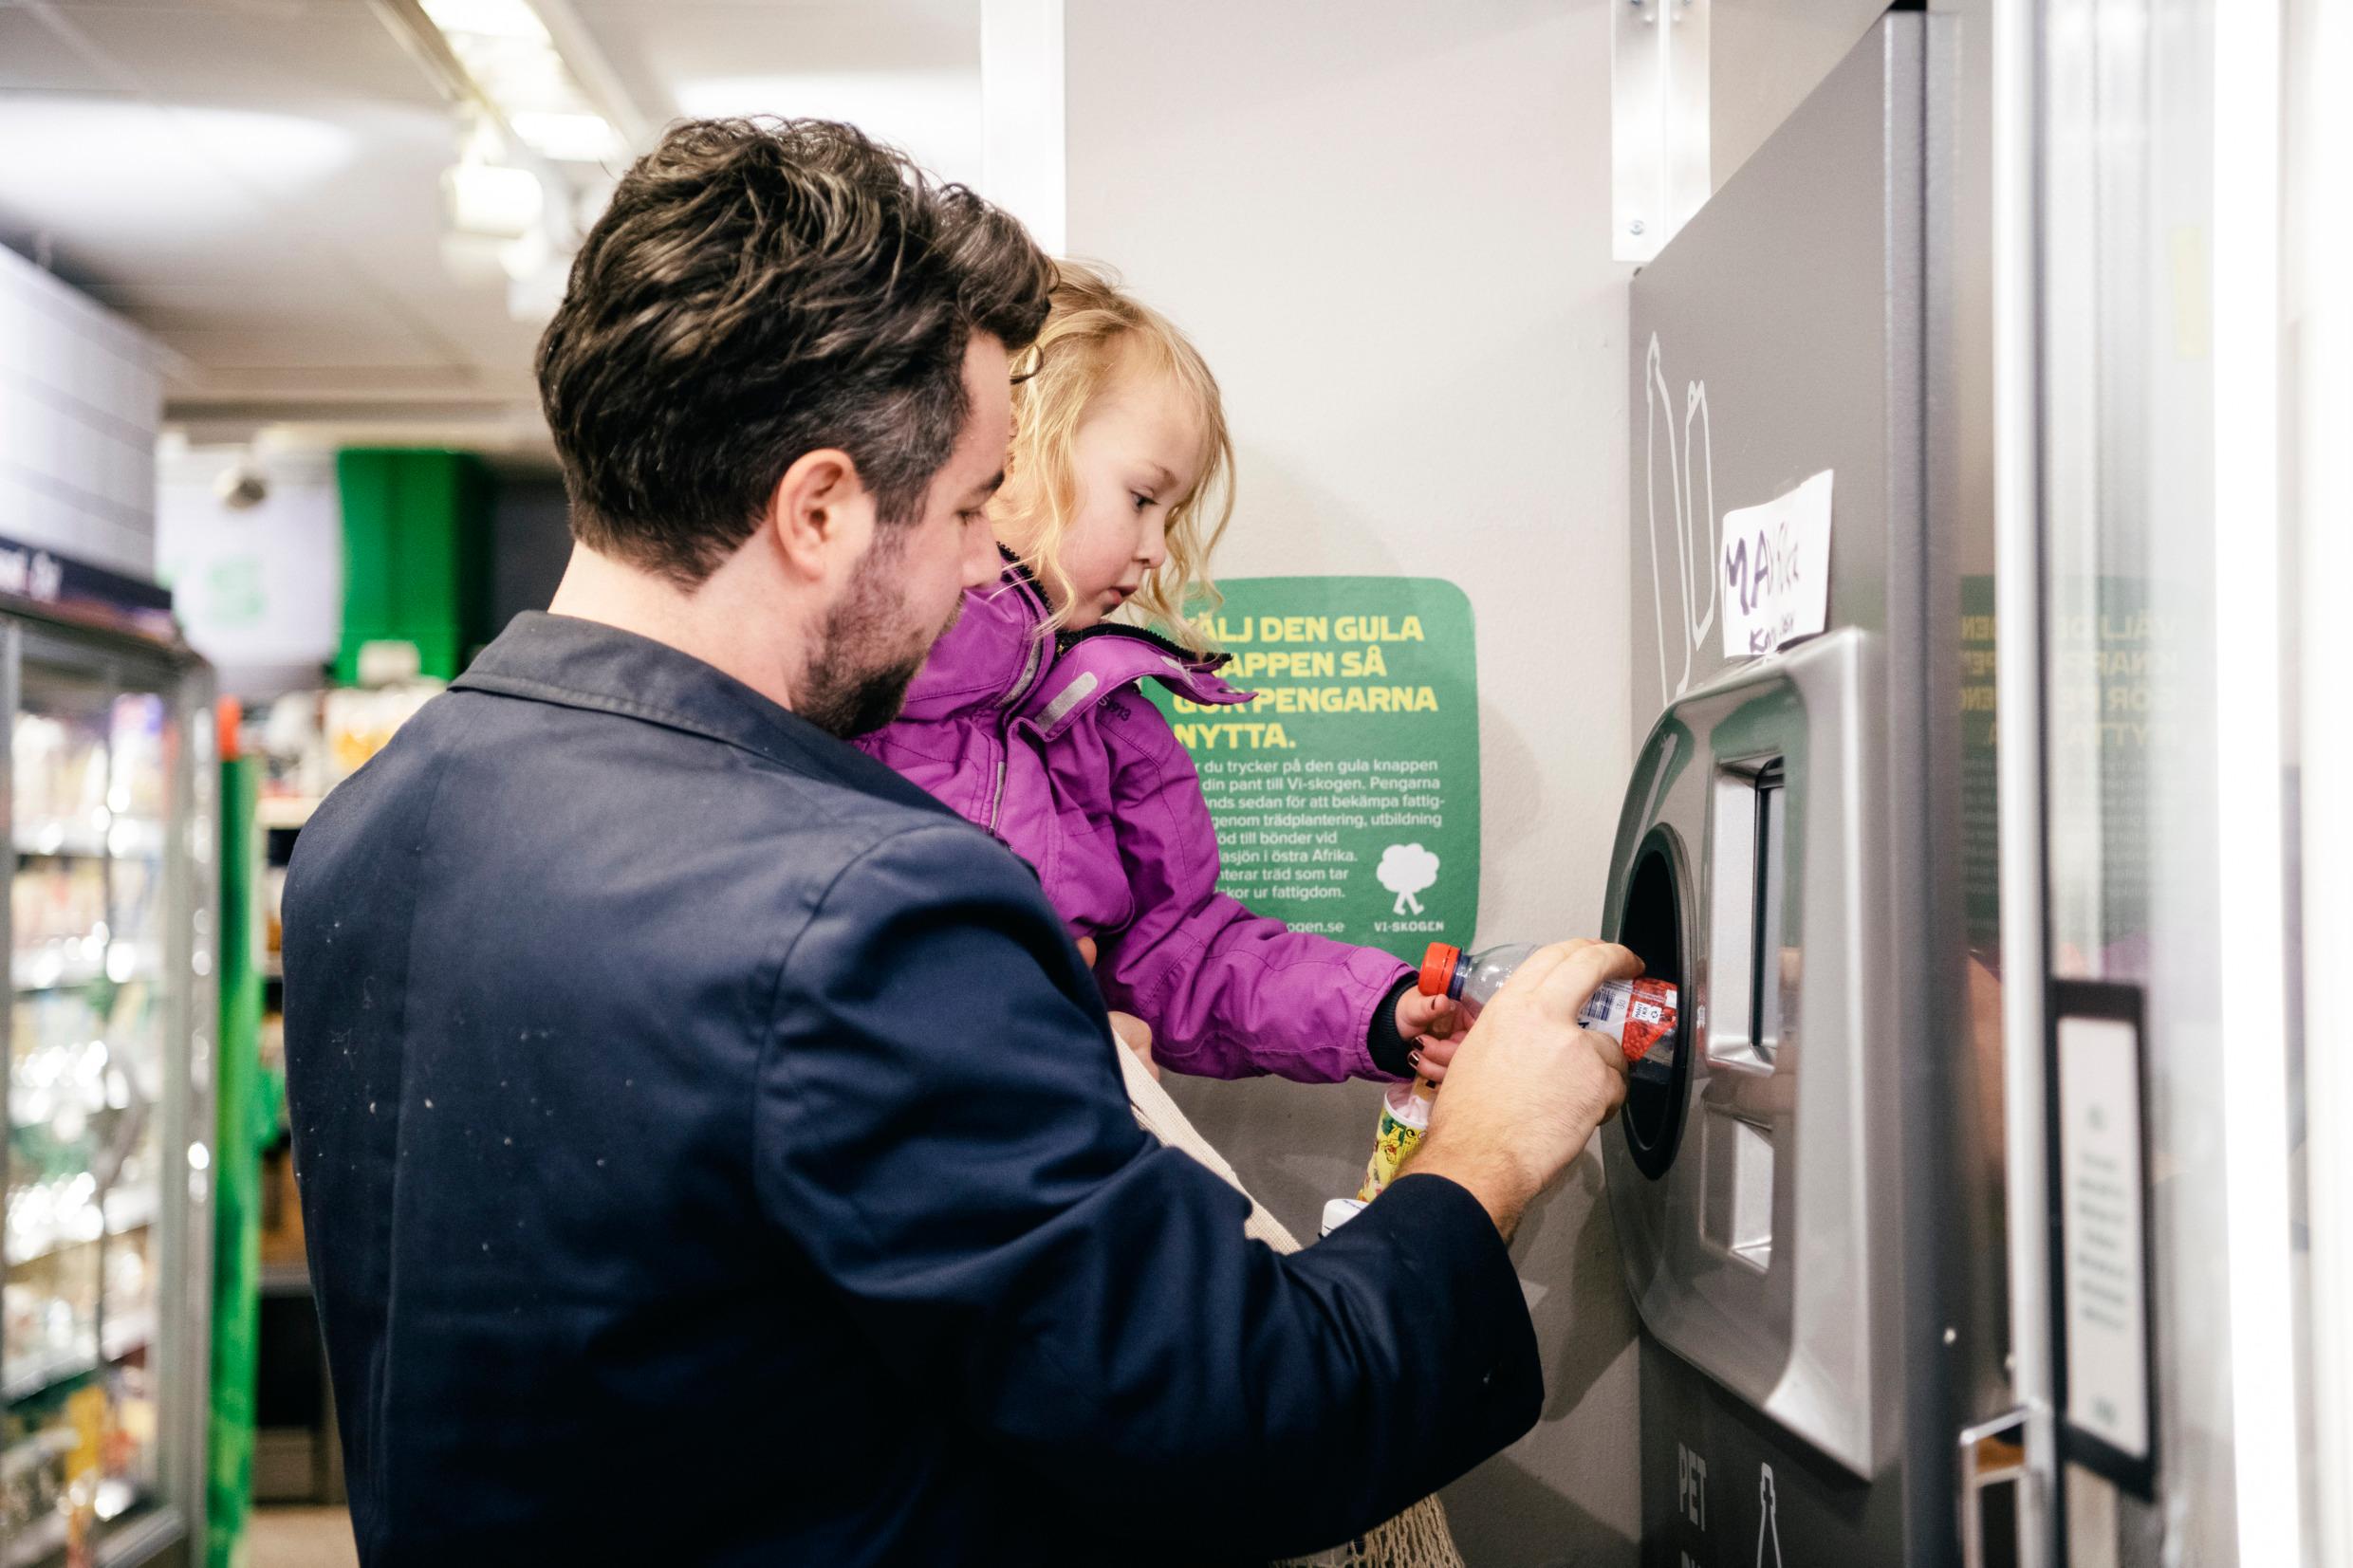 A man is holding a small child. Together they push a plastic bottle into a machine, A common sight of Swedish recycling.